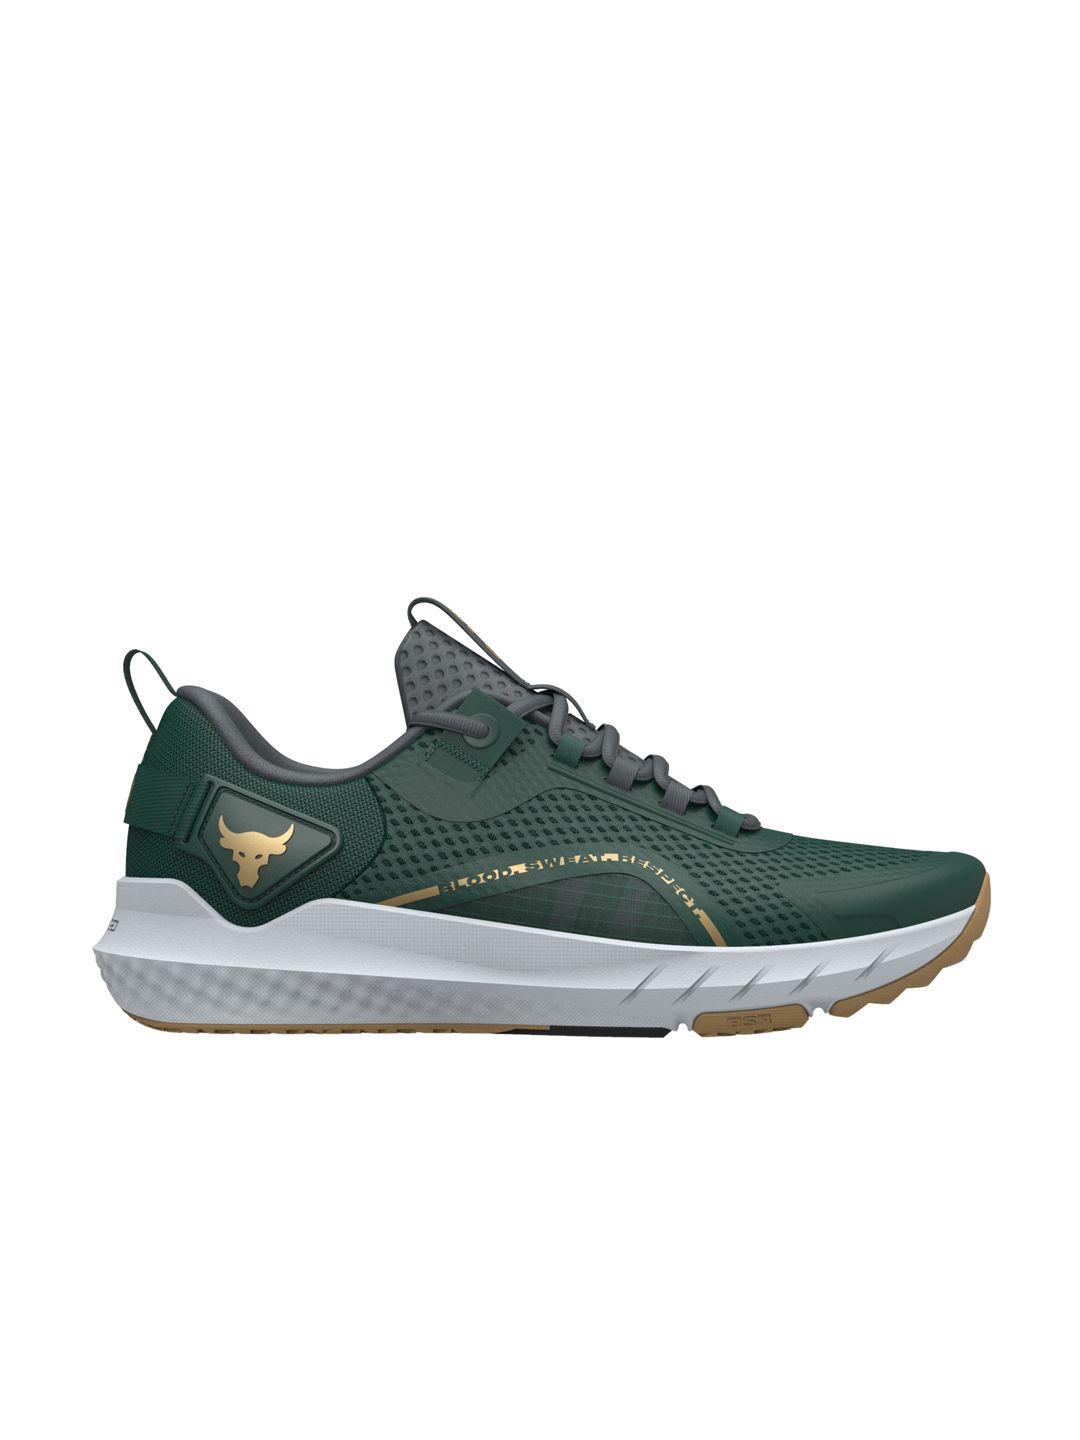 under armour unisex green textile training or gym shoes